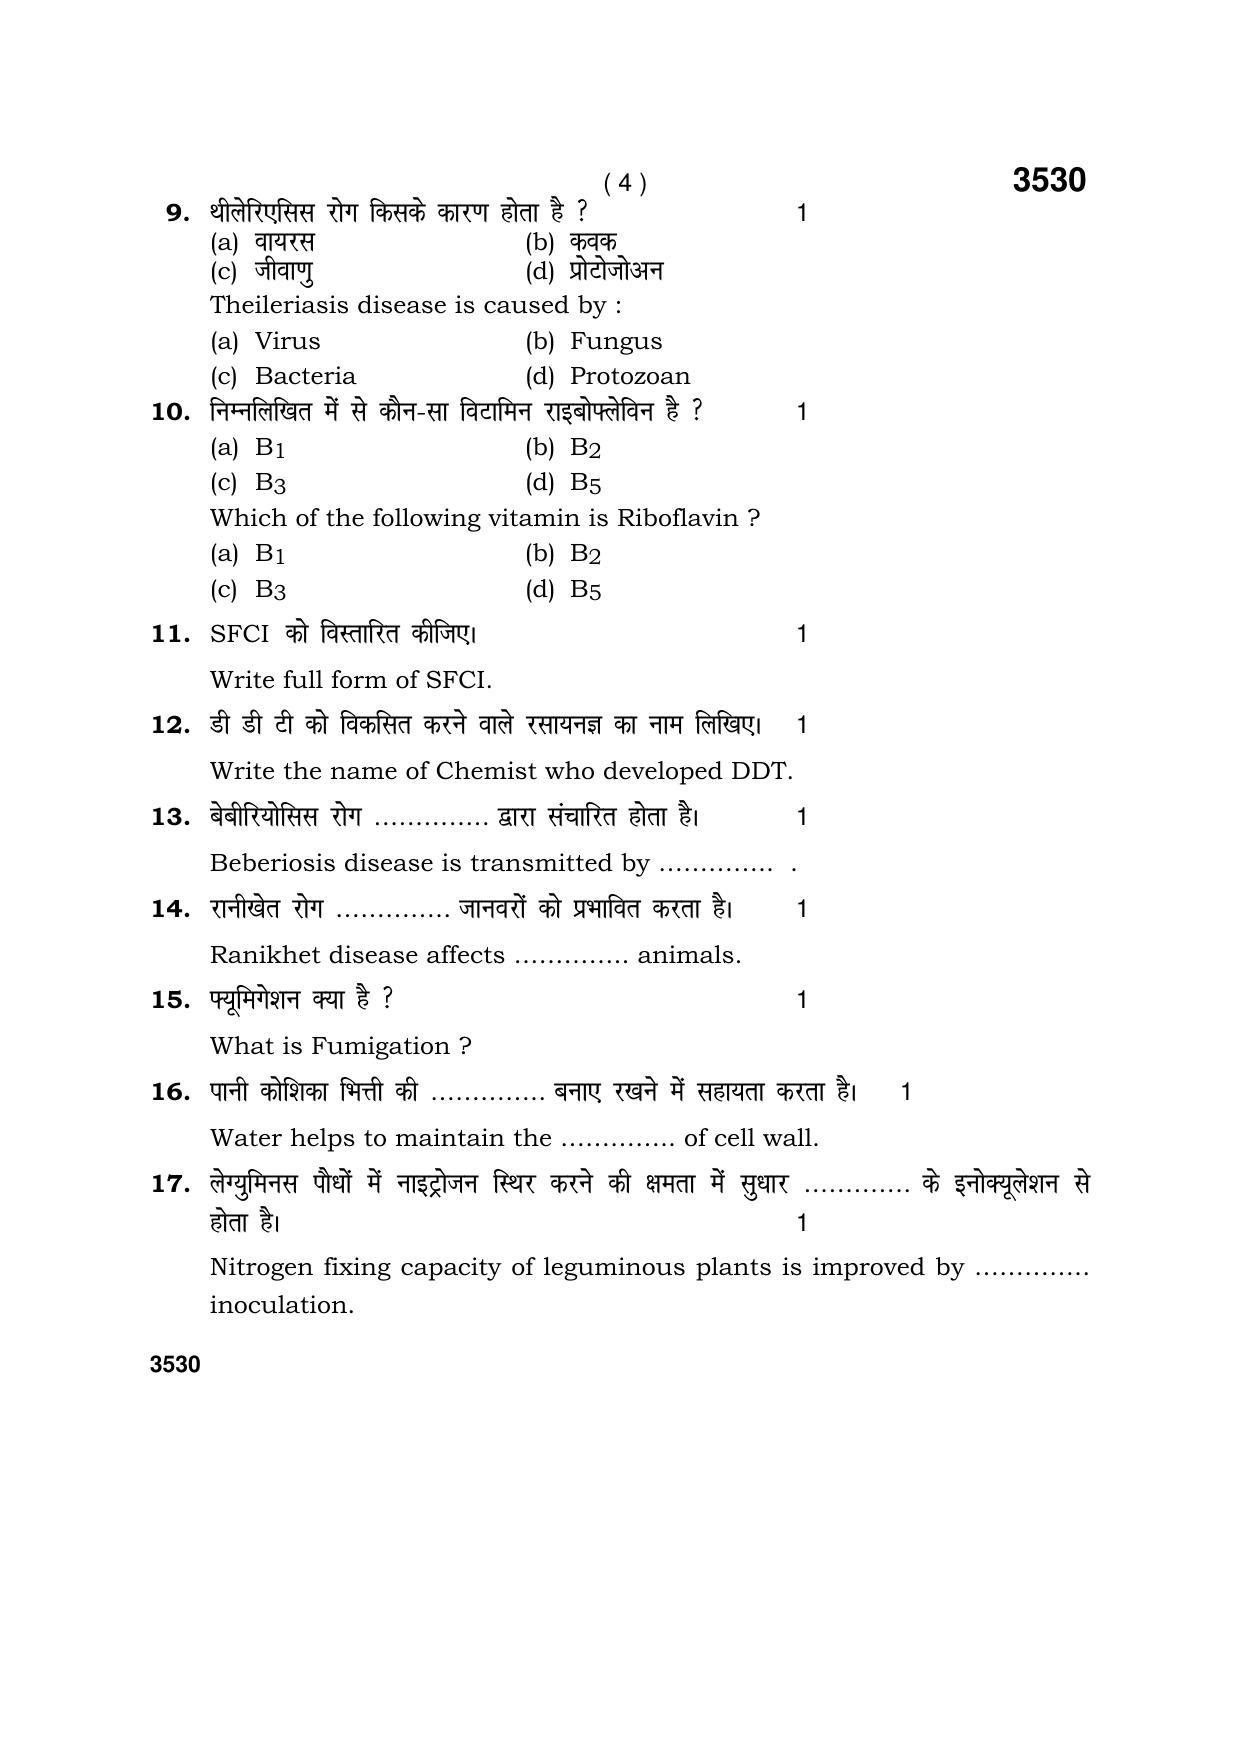 Haryana Board HBSE Class 10 Agriculture Paddy Farming 2018 Question Paper - Page 4